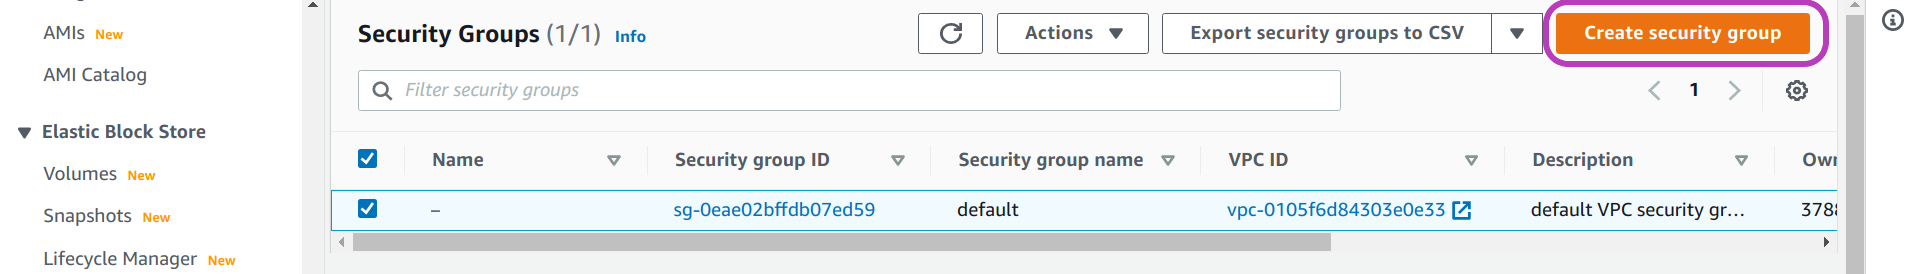 Screenshot of AWS Console "Security Groups" page in a browser with the button "Create security group" circled.